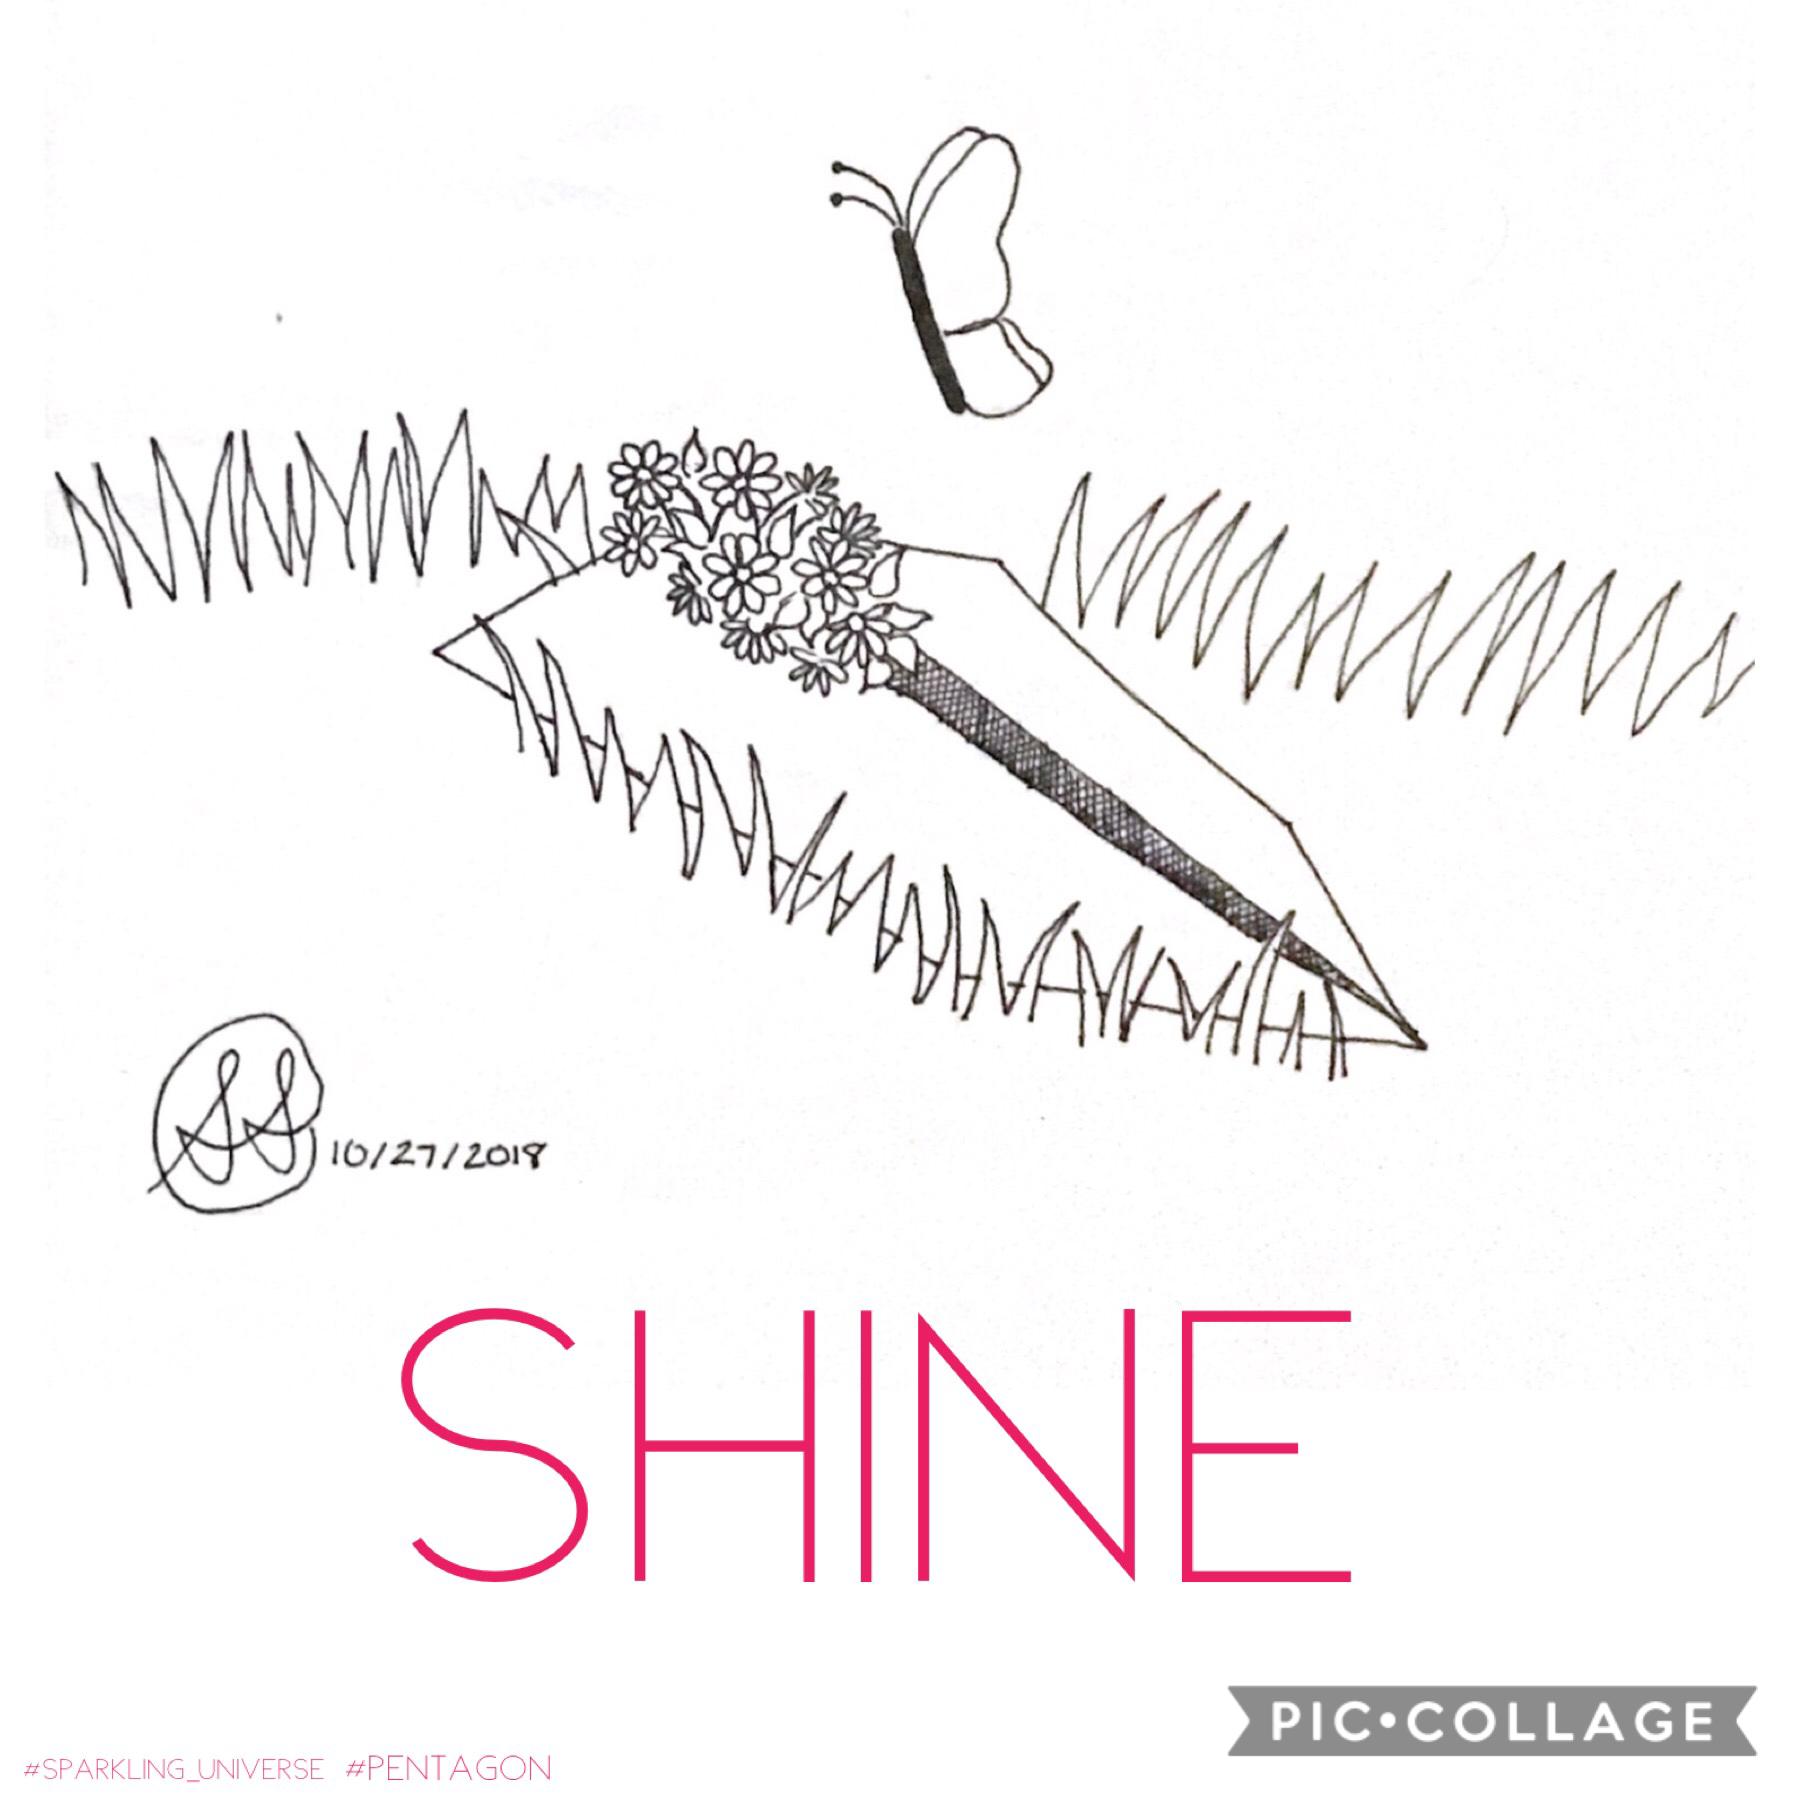 Pentagon’s Shine. It took me most of Saturday to draw this.